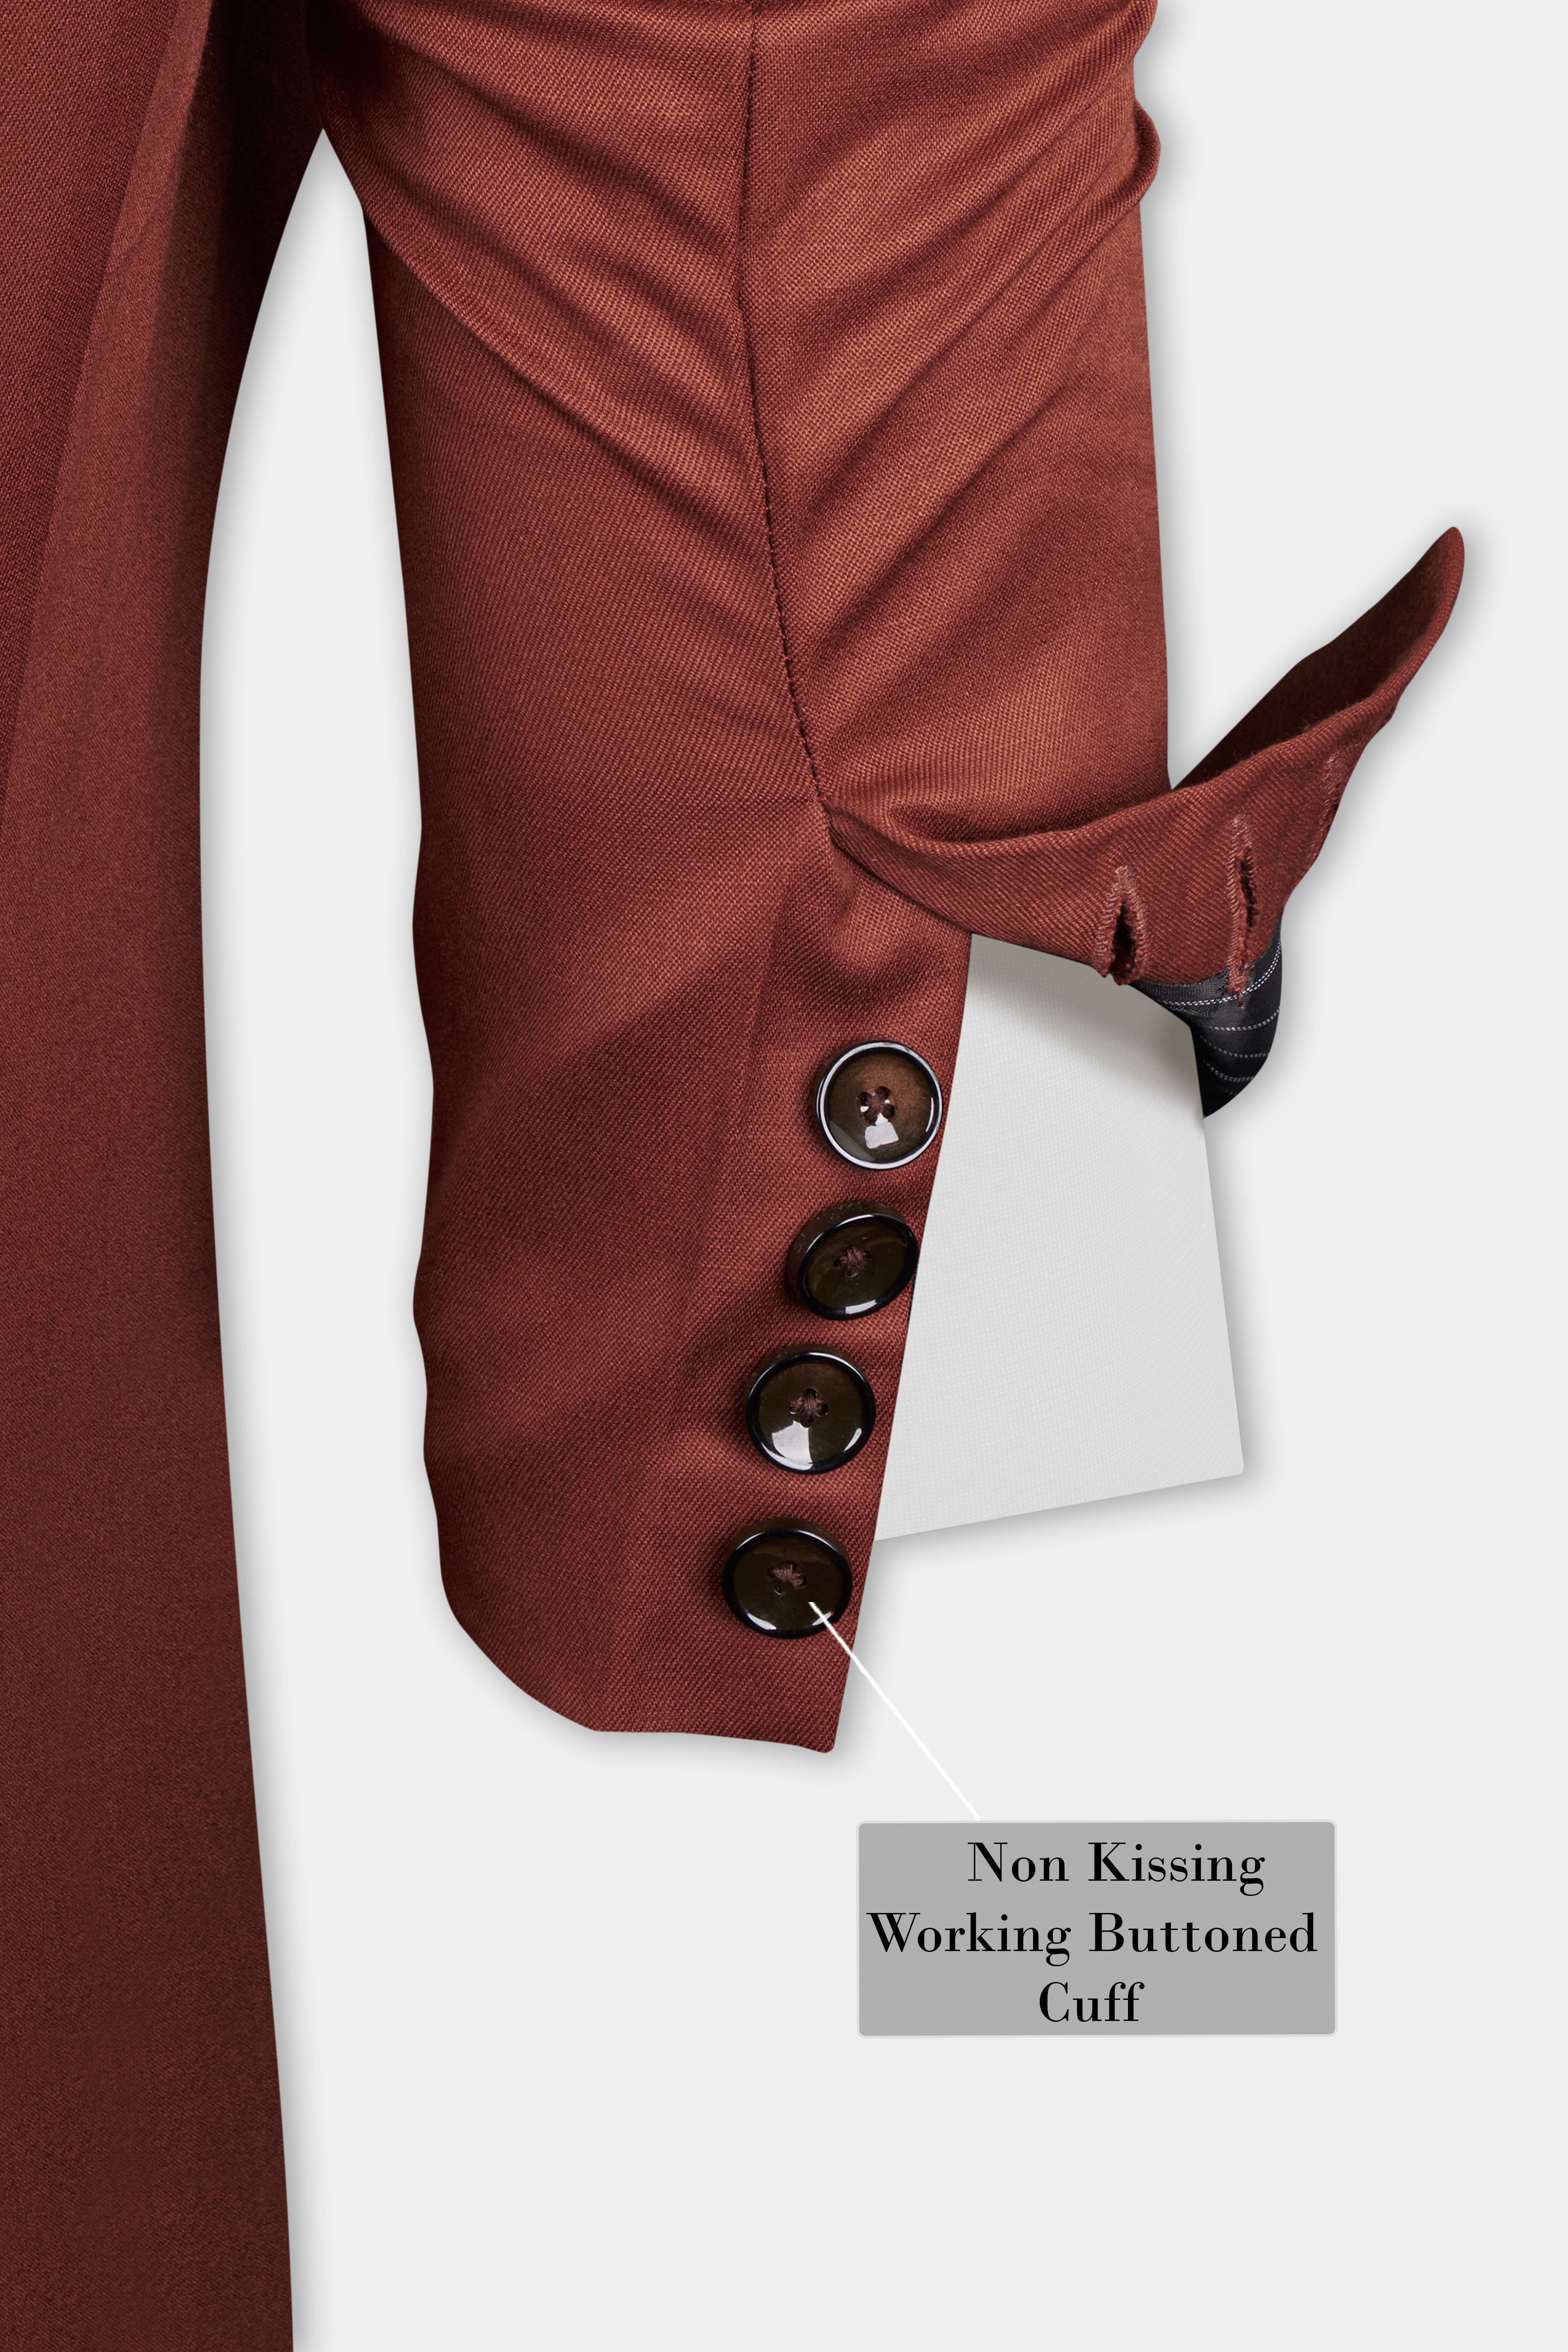 Ironstone Red Stretchable Double-Breasted traveler Blazer